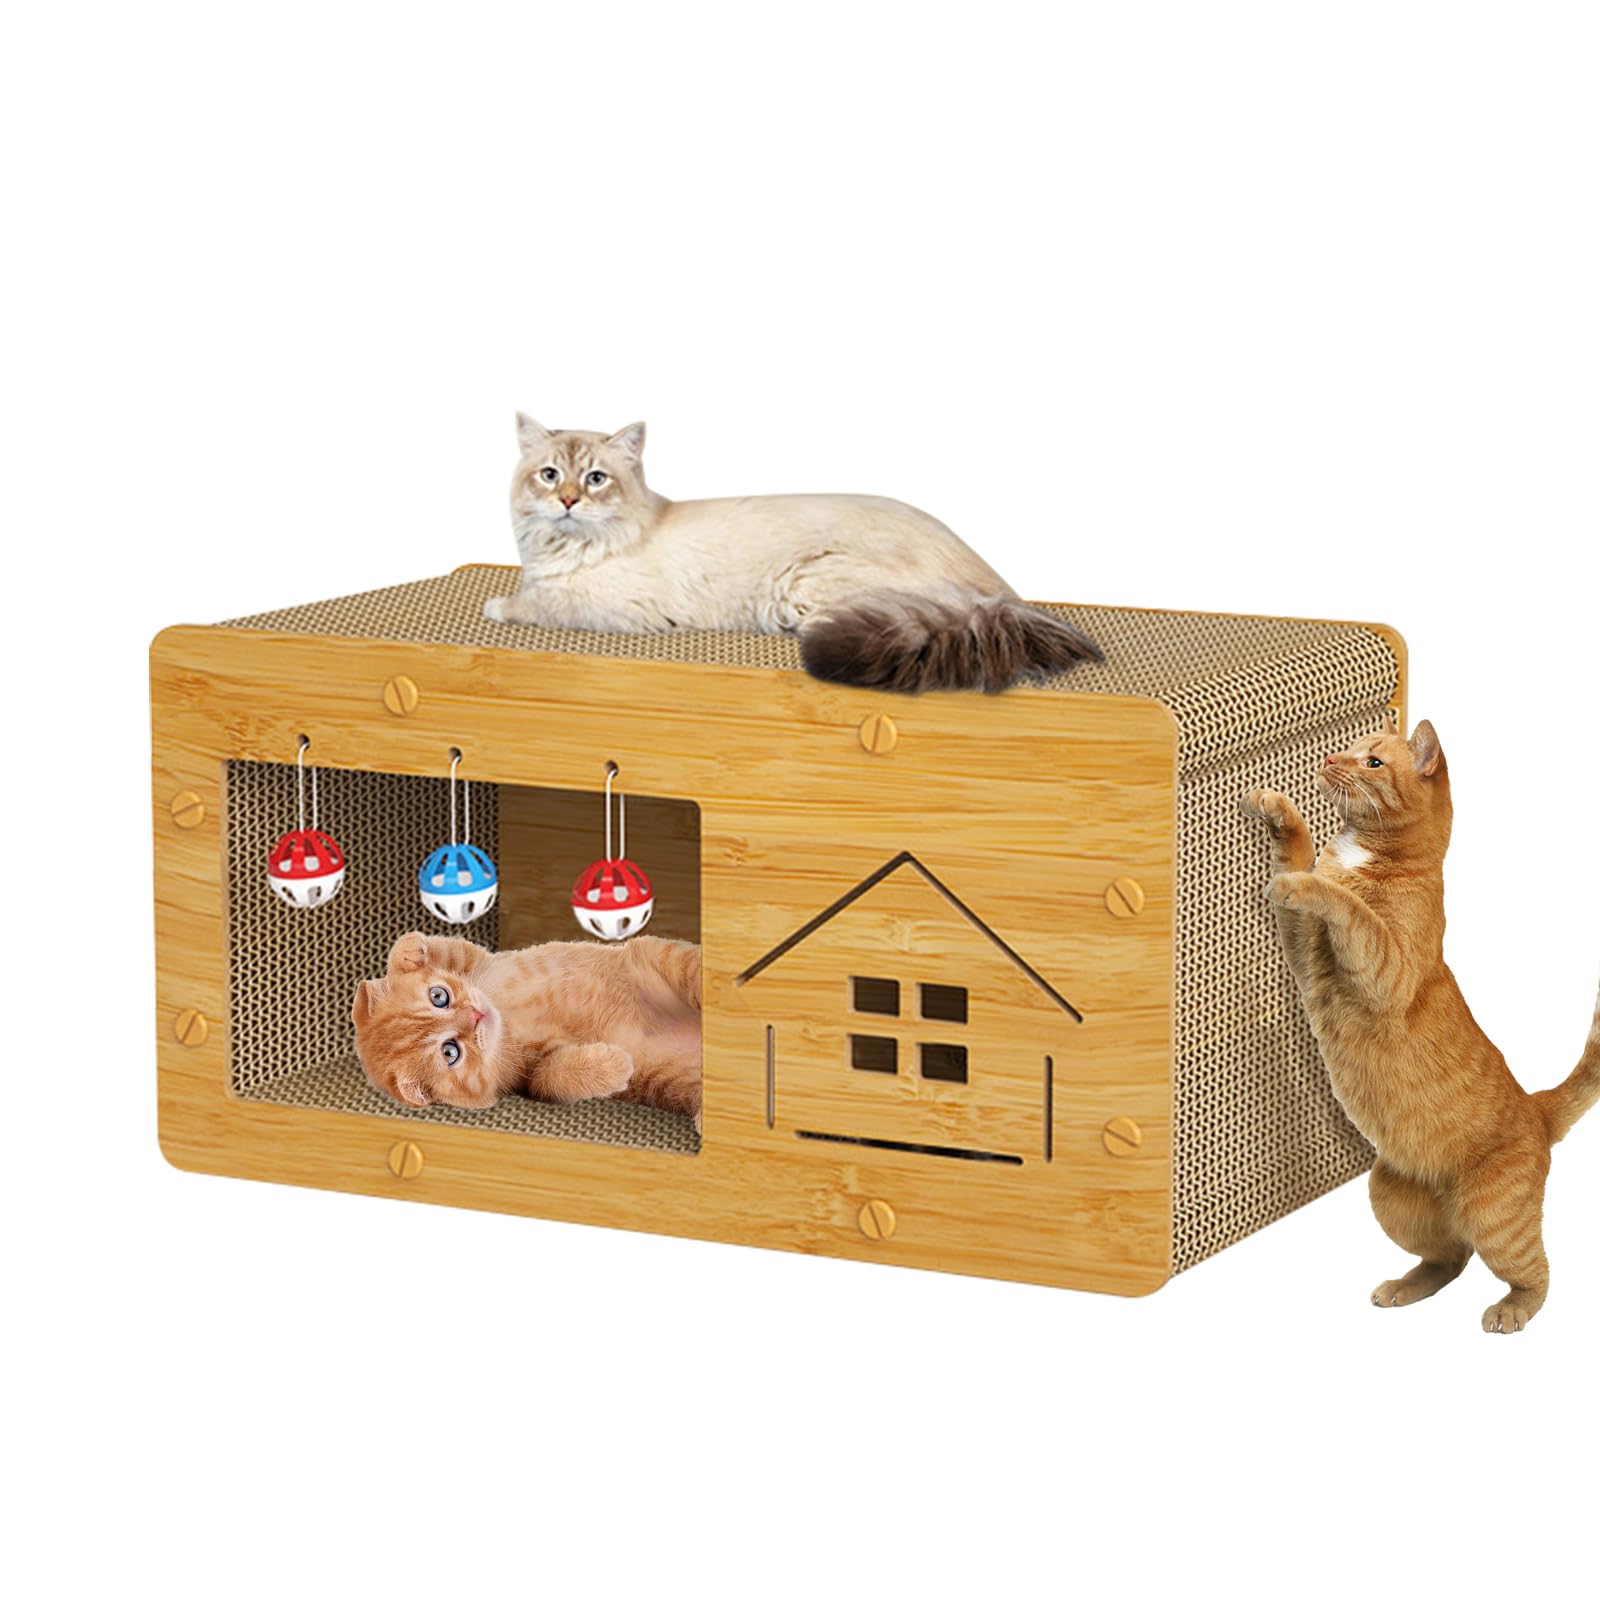 Aheyimcn Cat Scratcher House, Wooden Cat Scratcher House with Cat Cardboard Pad with Ball with Bell, Large Space Let Your Kitties Scratch, Play, & Rest Cardboard Cat House Easy to Assemble (Large)